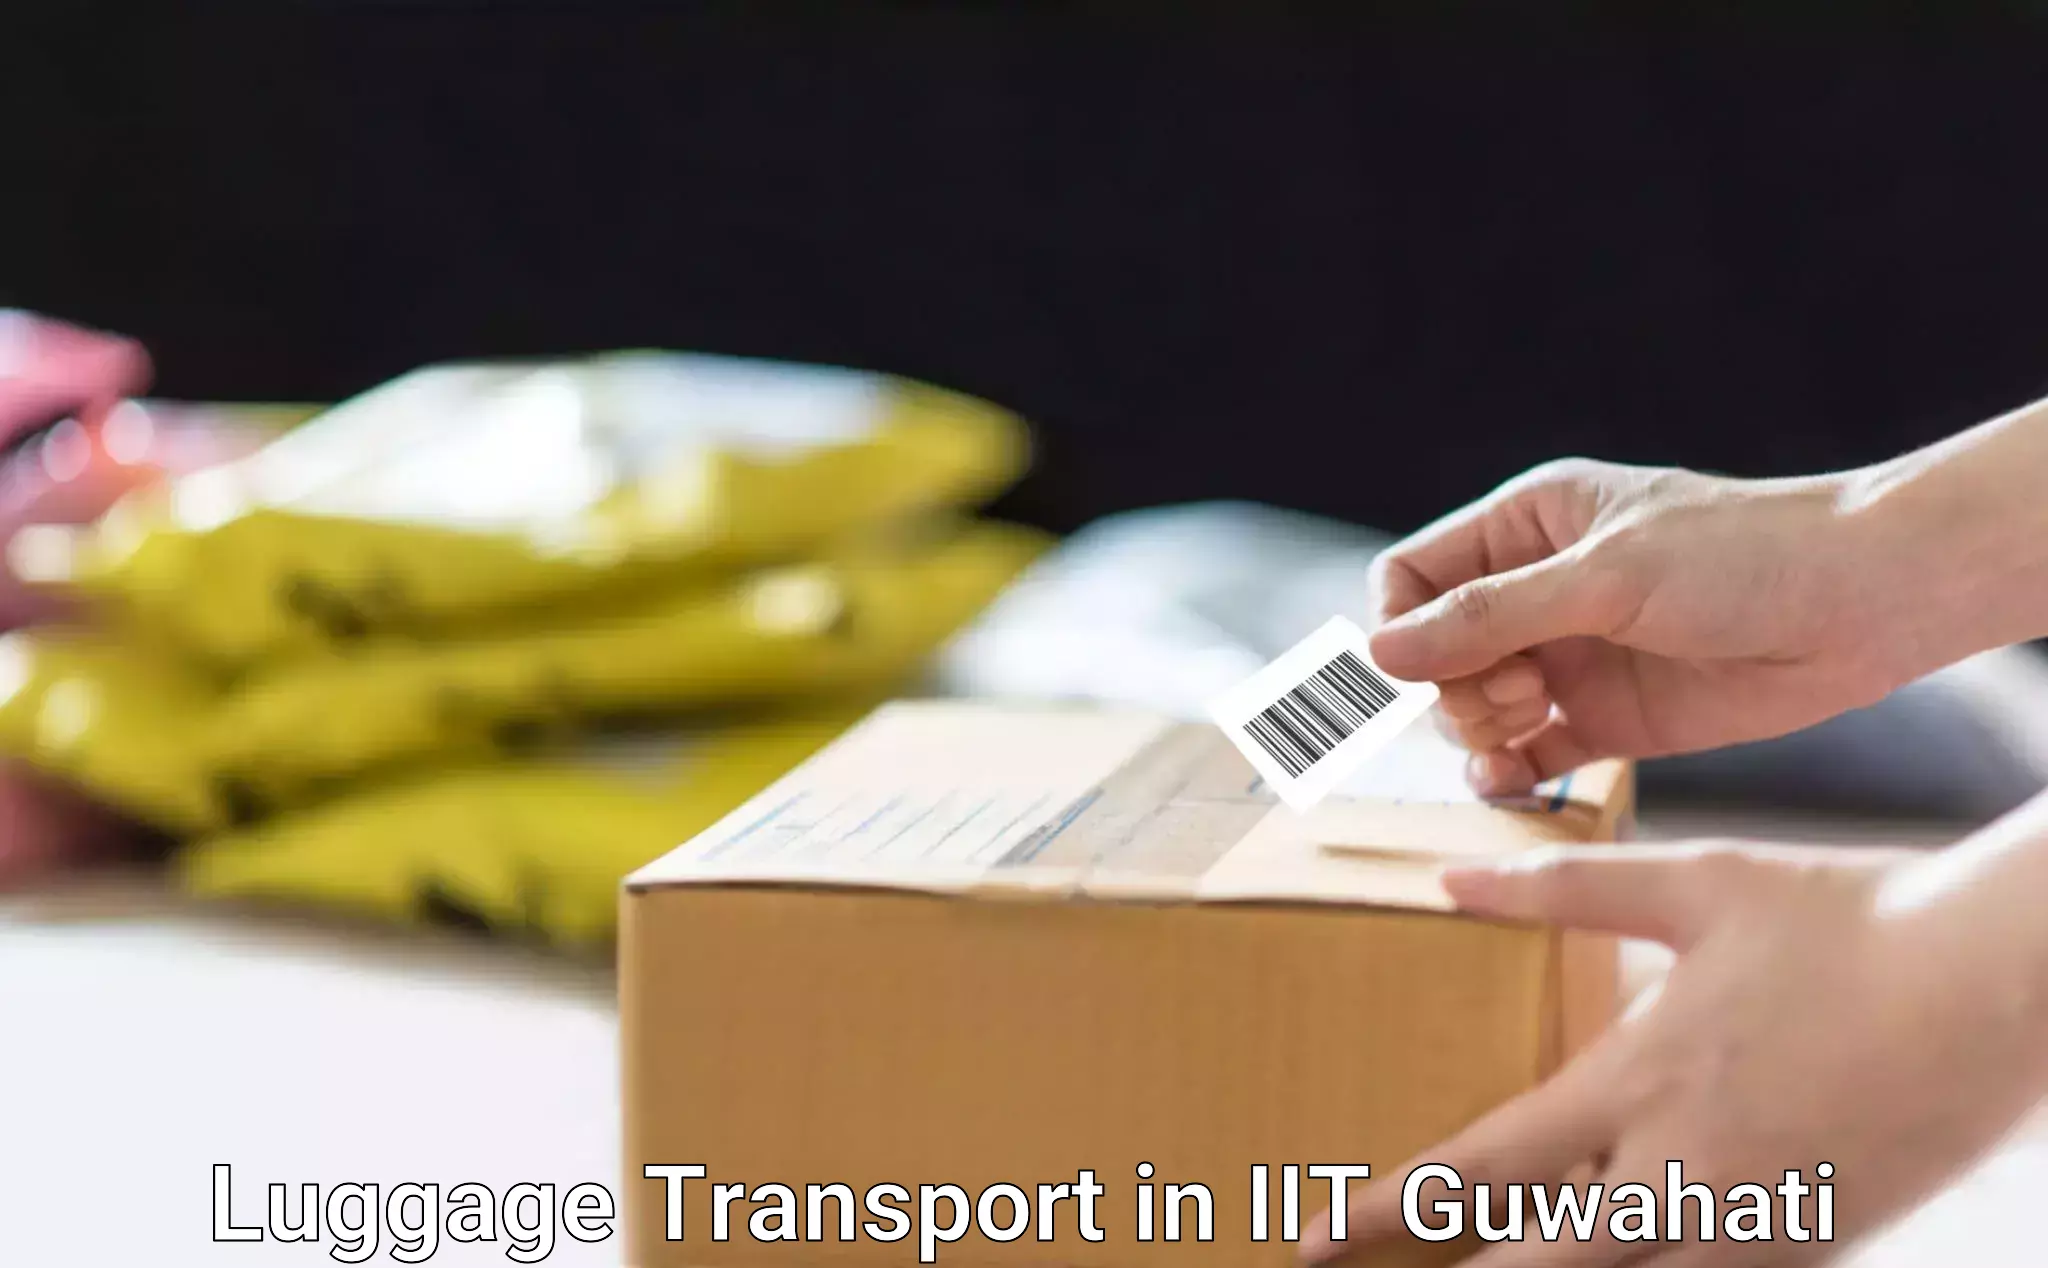 Excess baggage transport in IIT Guwahati